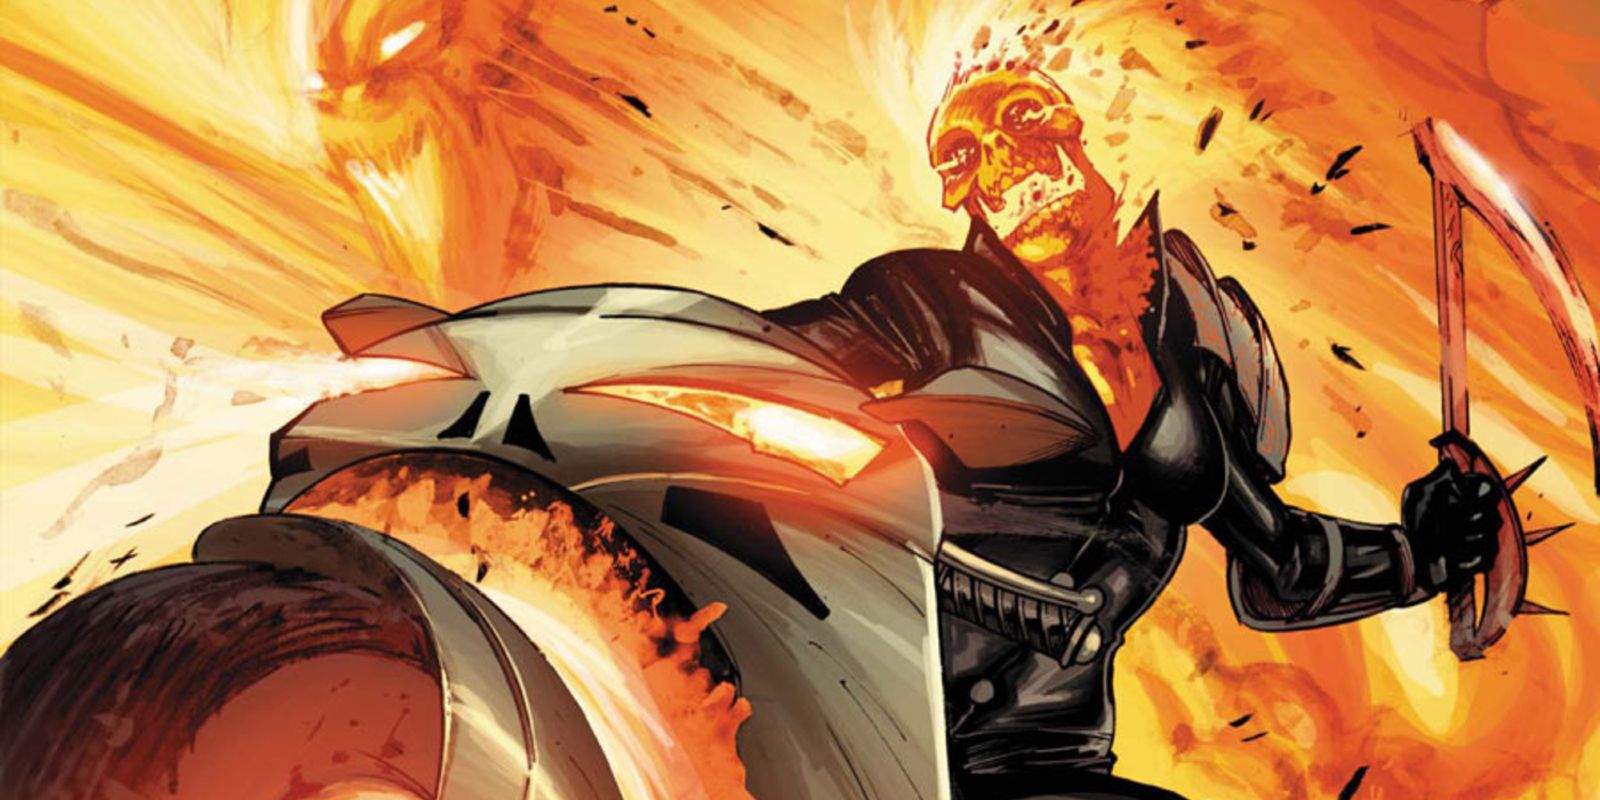 Alejandra Jones riding her flaming cycle as Ghost Rider from Marvel Comics